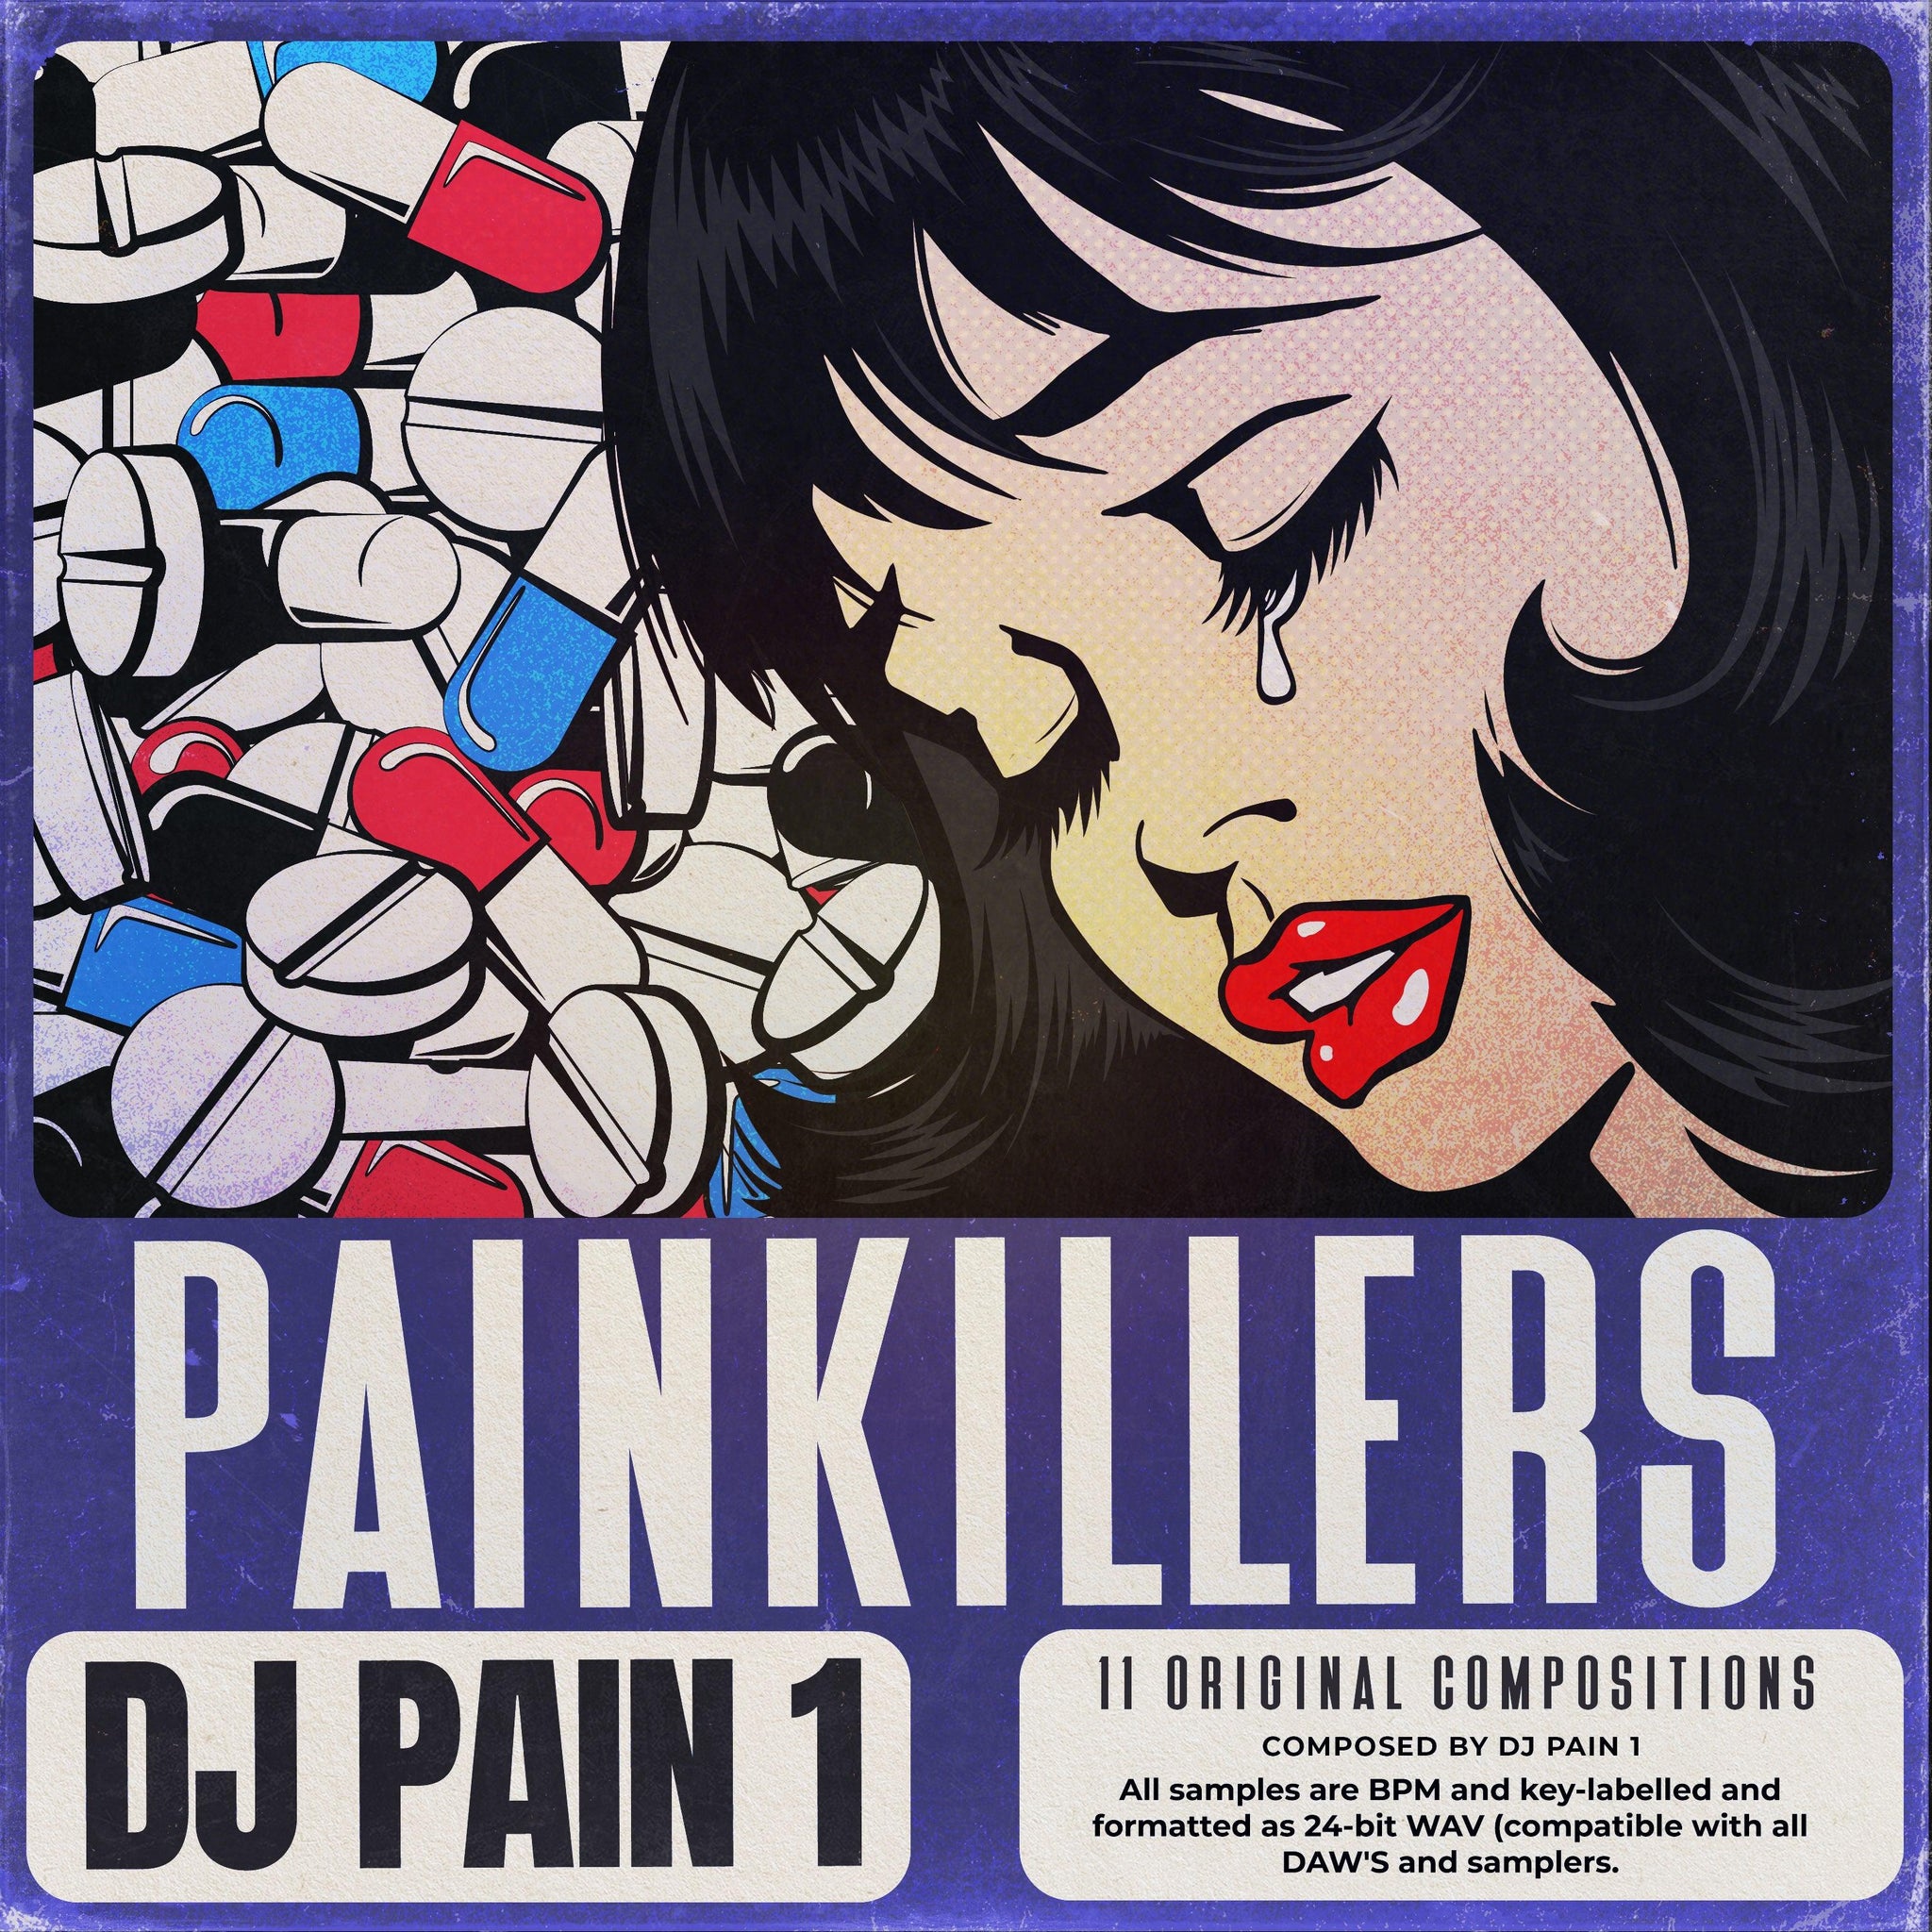 The Painkillers Bundle - The Sample Lab